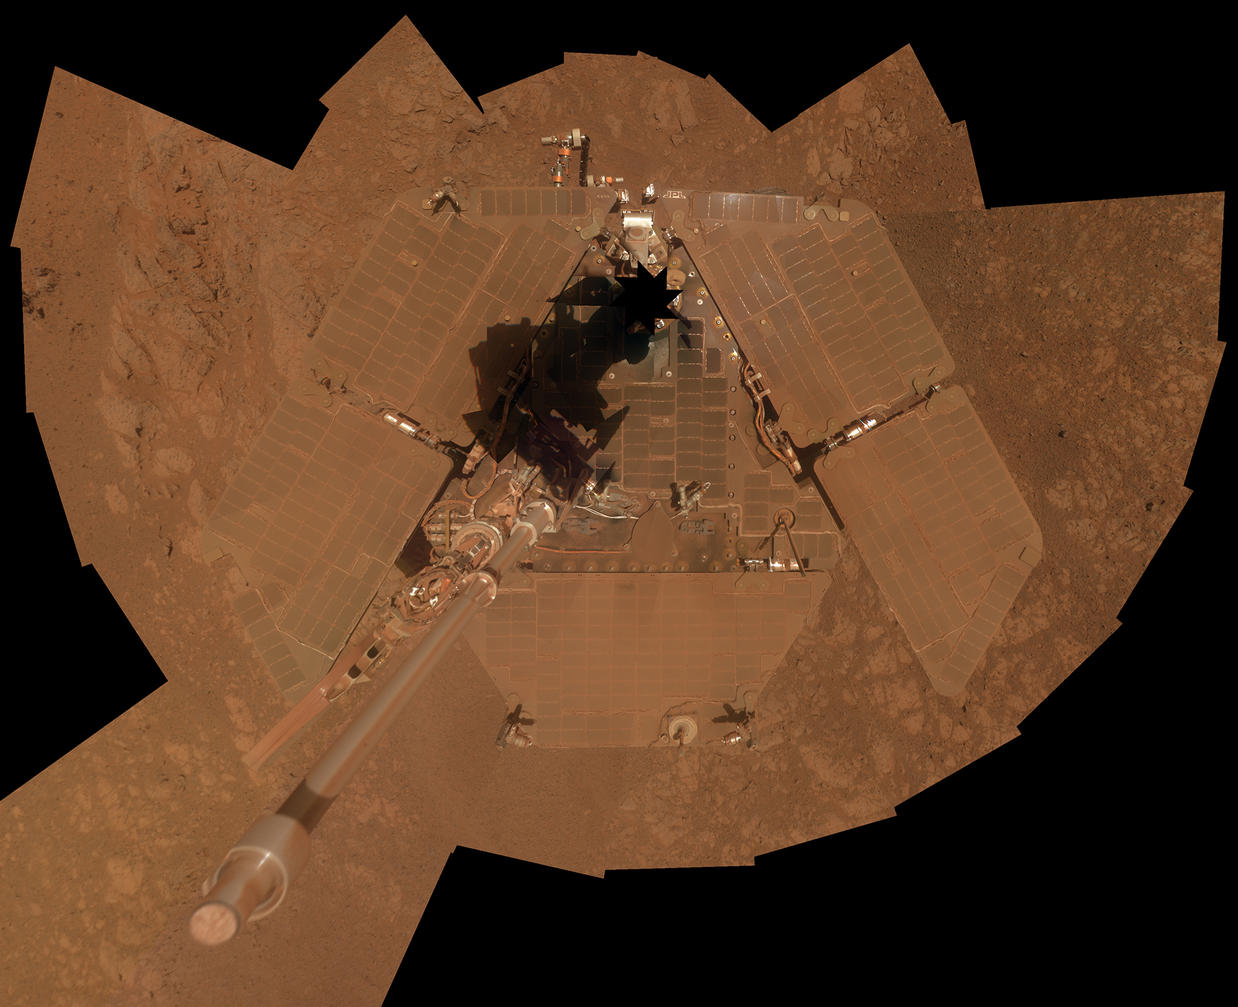 Self-Portrait by Opportunity Mars Rover in January 2014